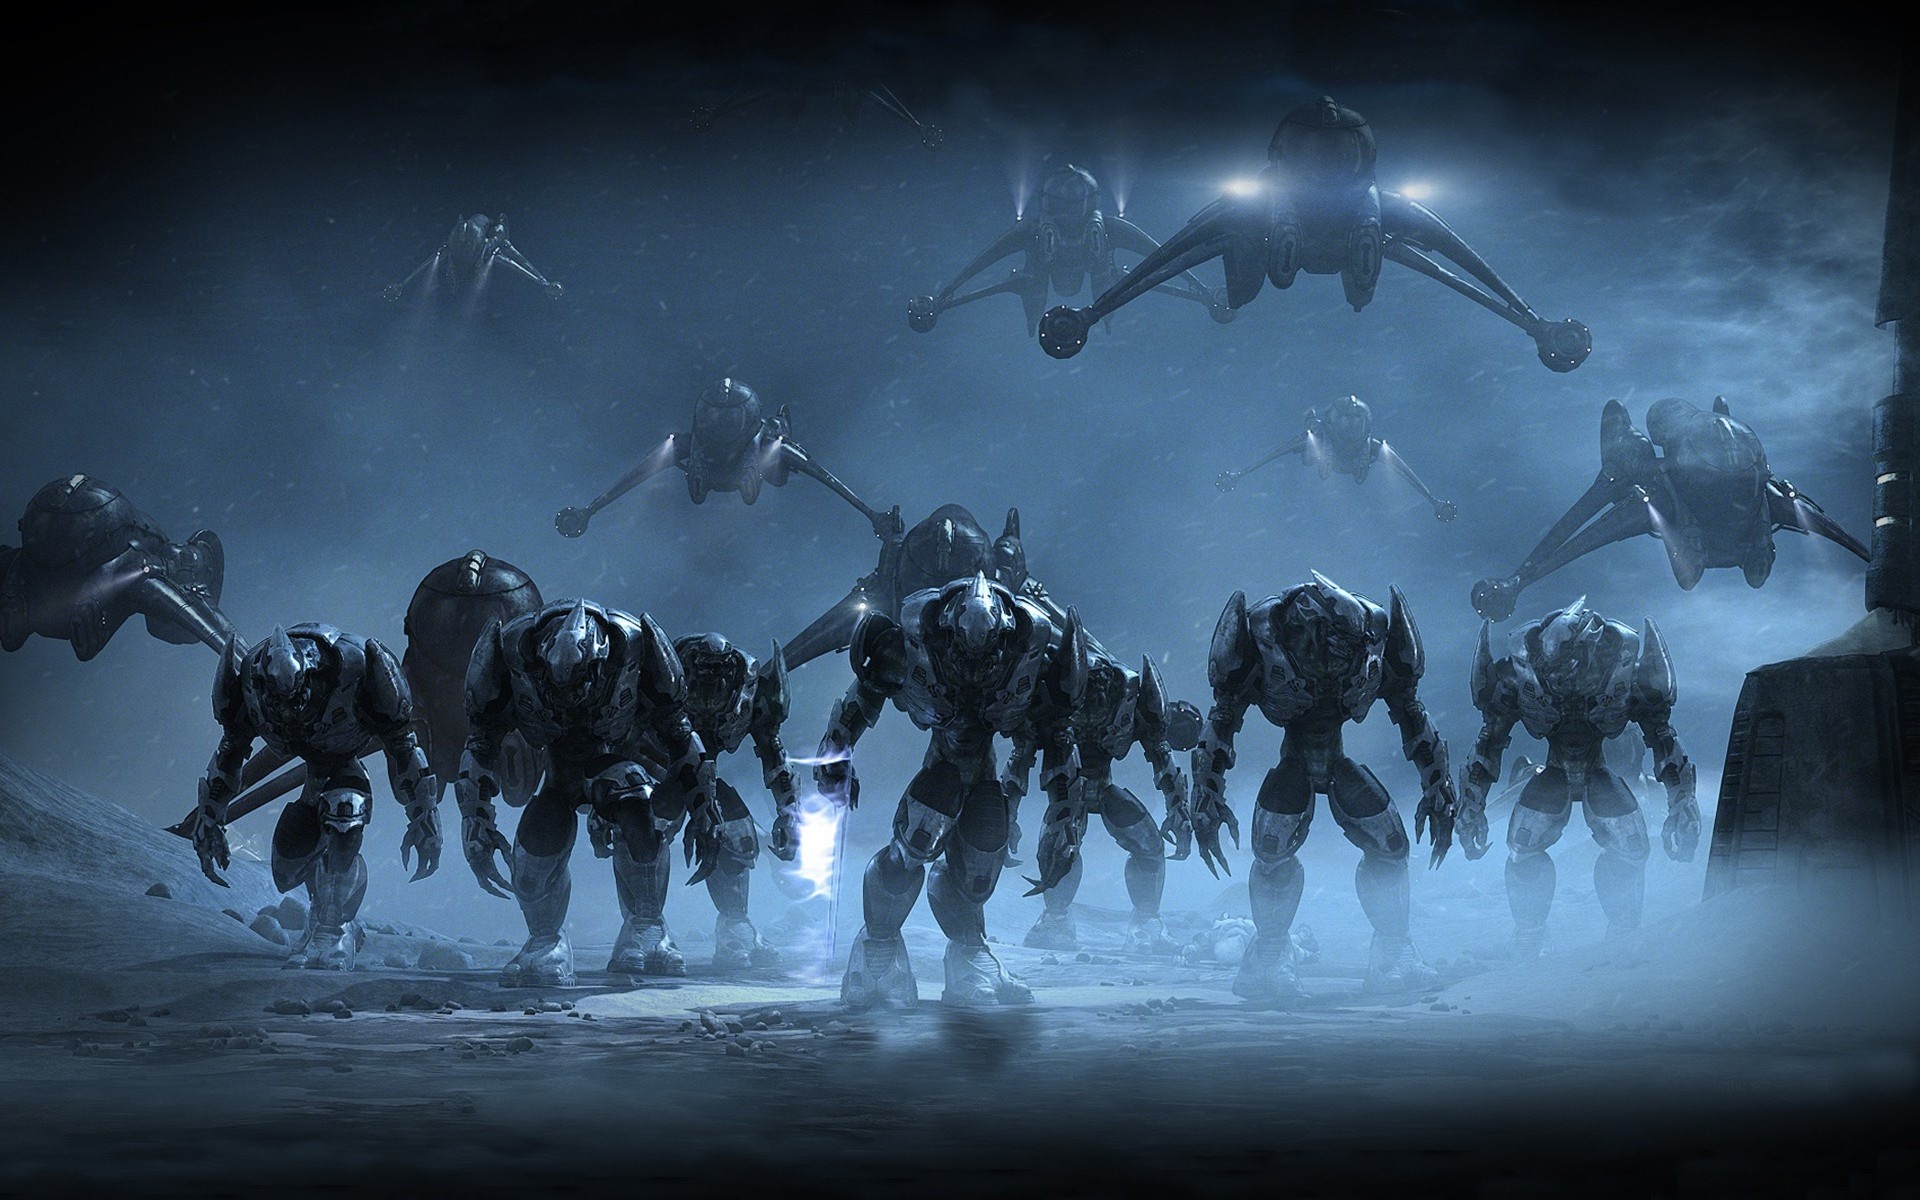 Halo game HD wallpapers #26 - 1920x1200